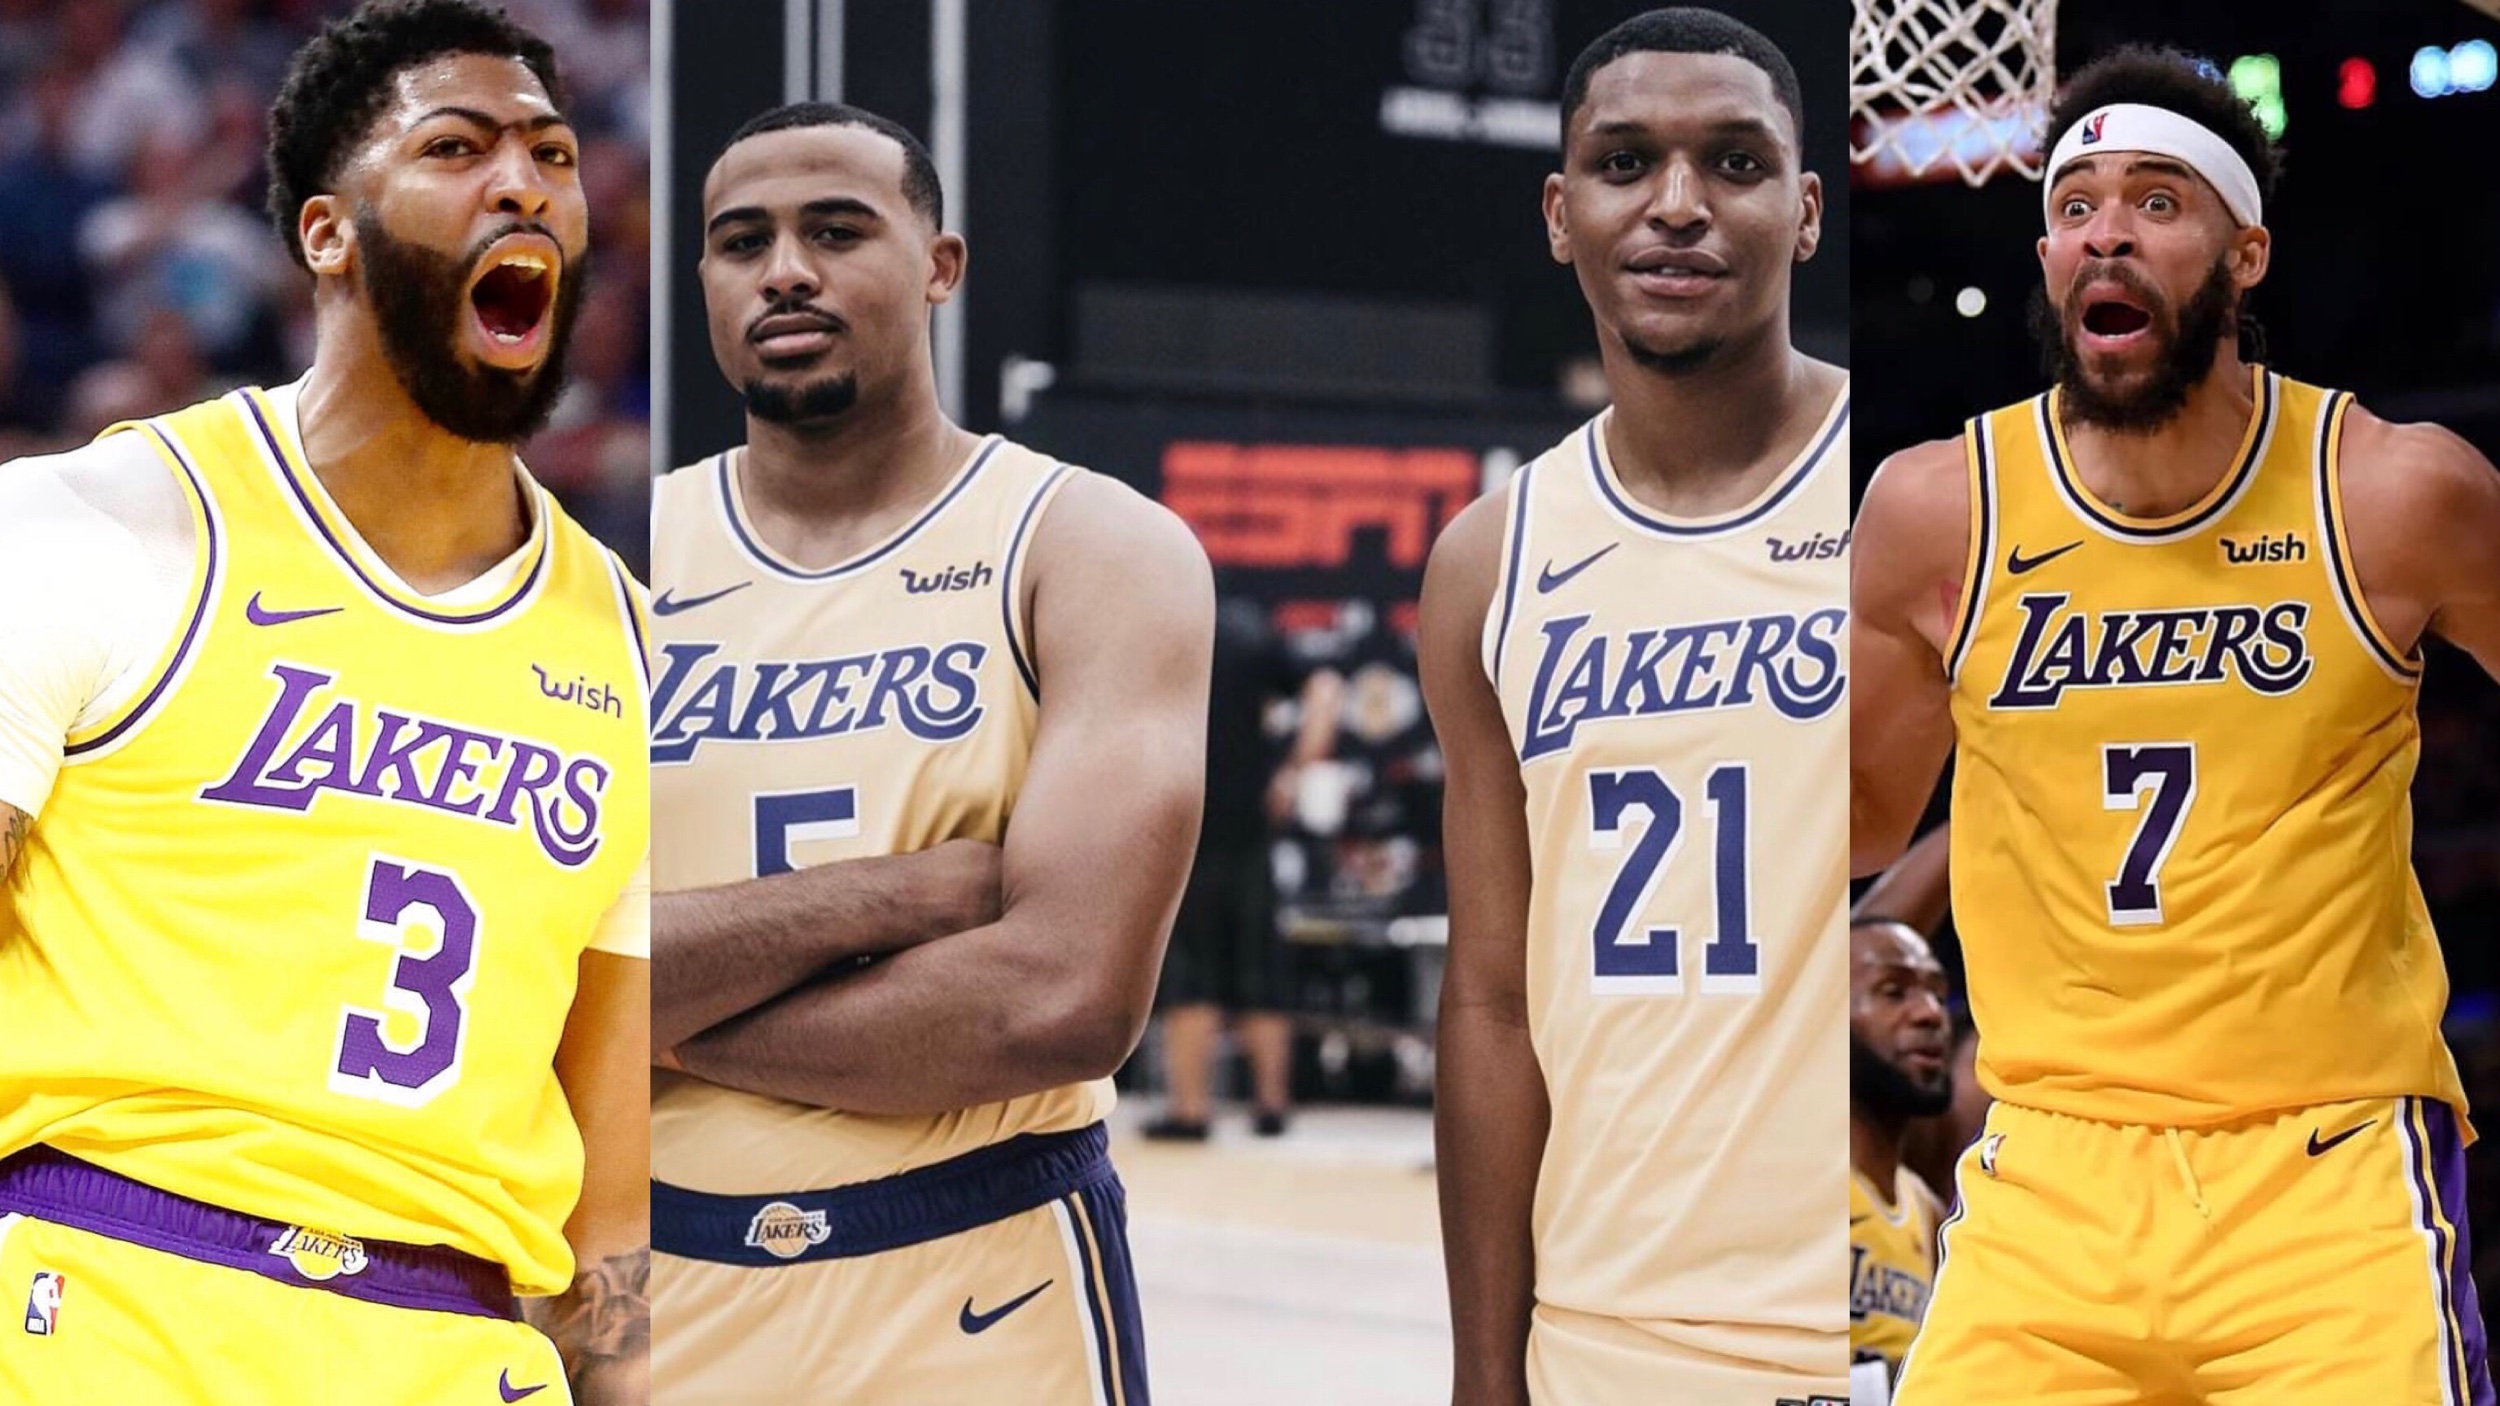 217 lakers jersey